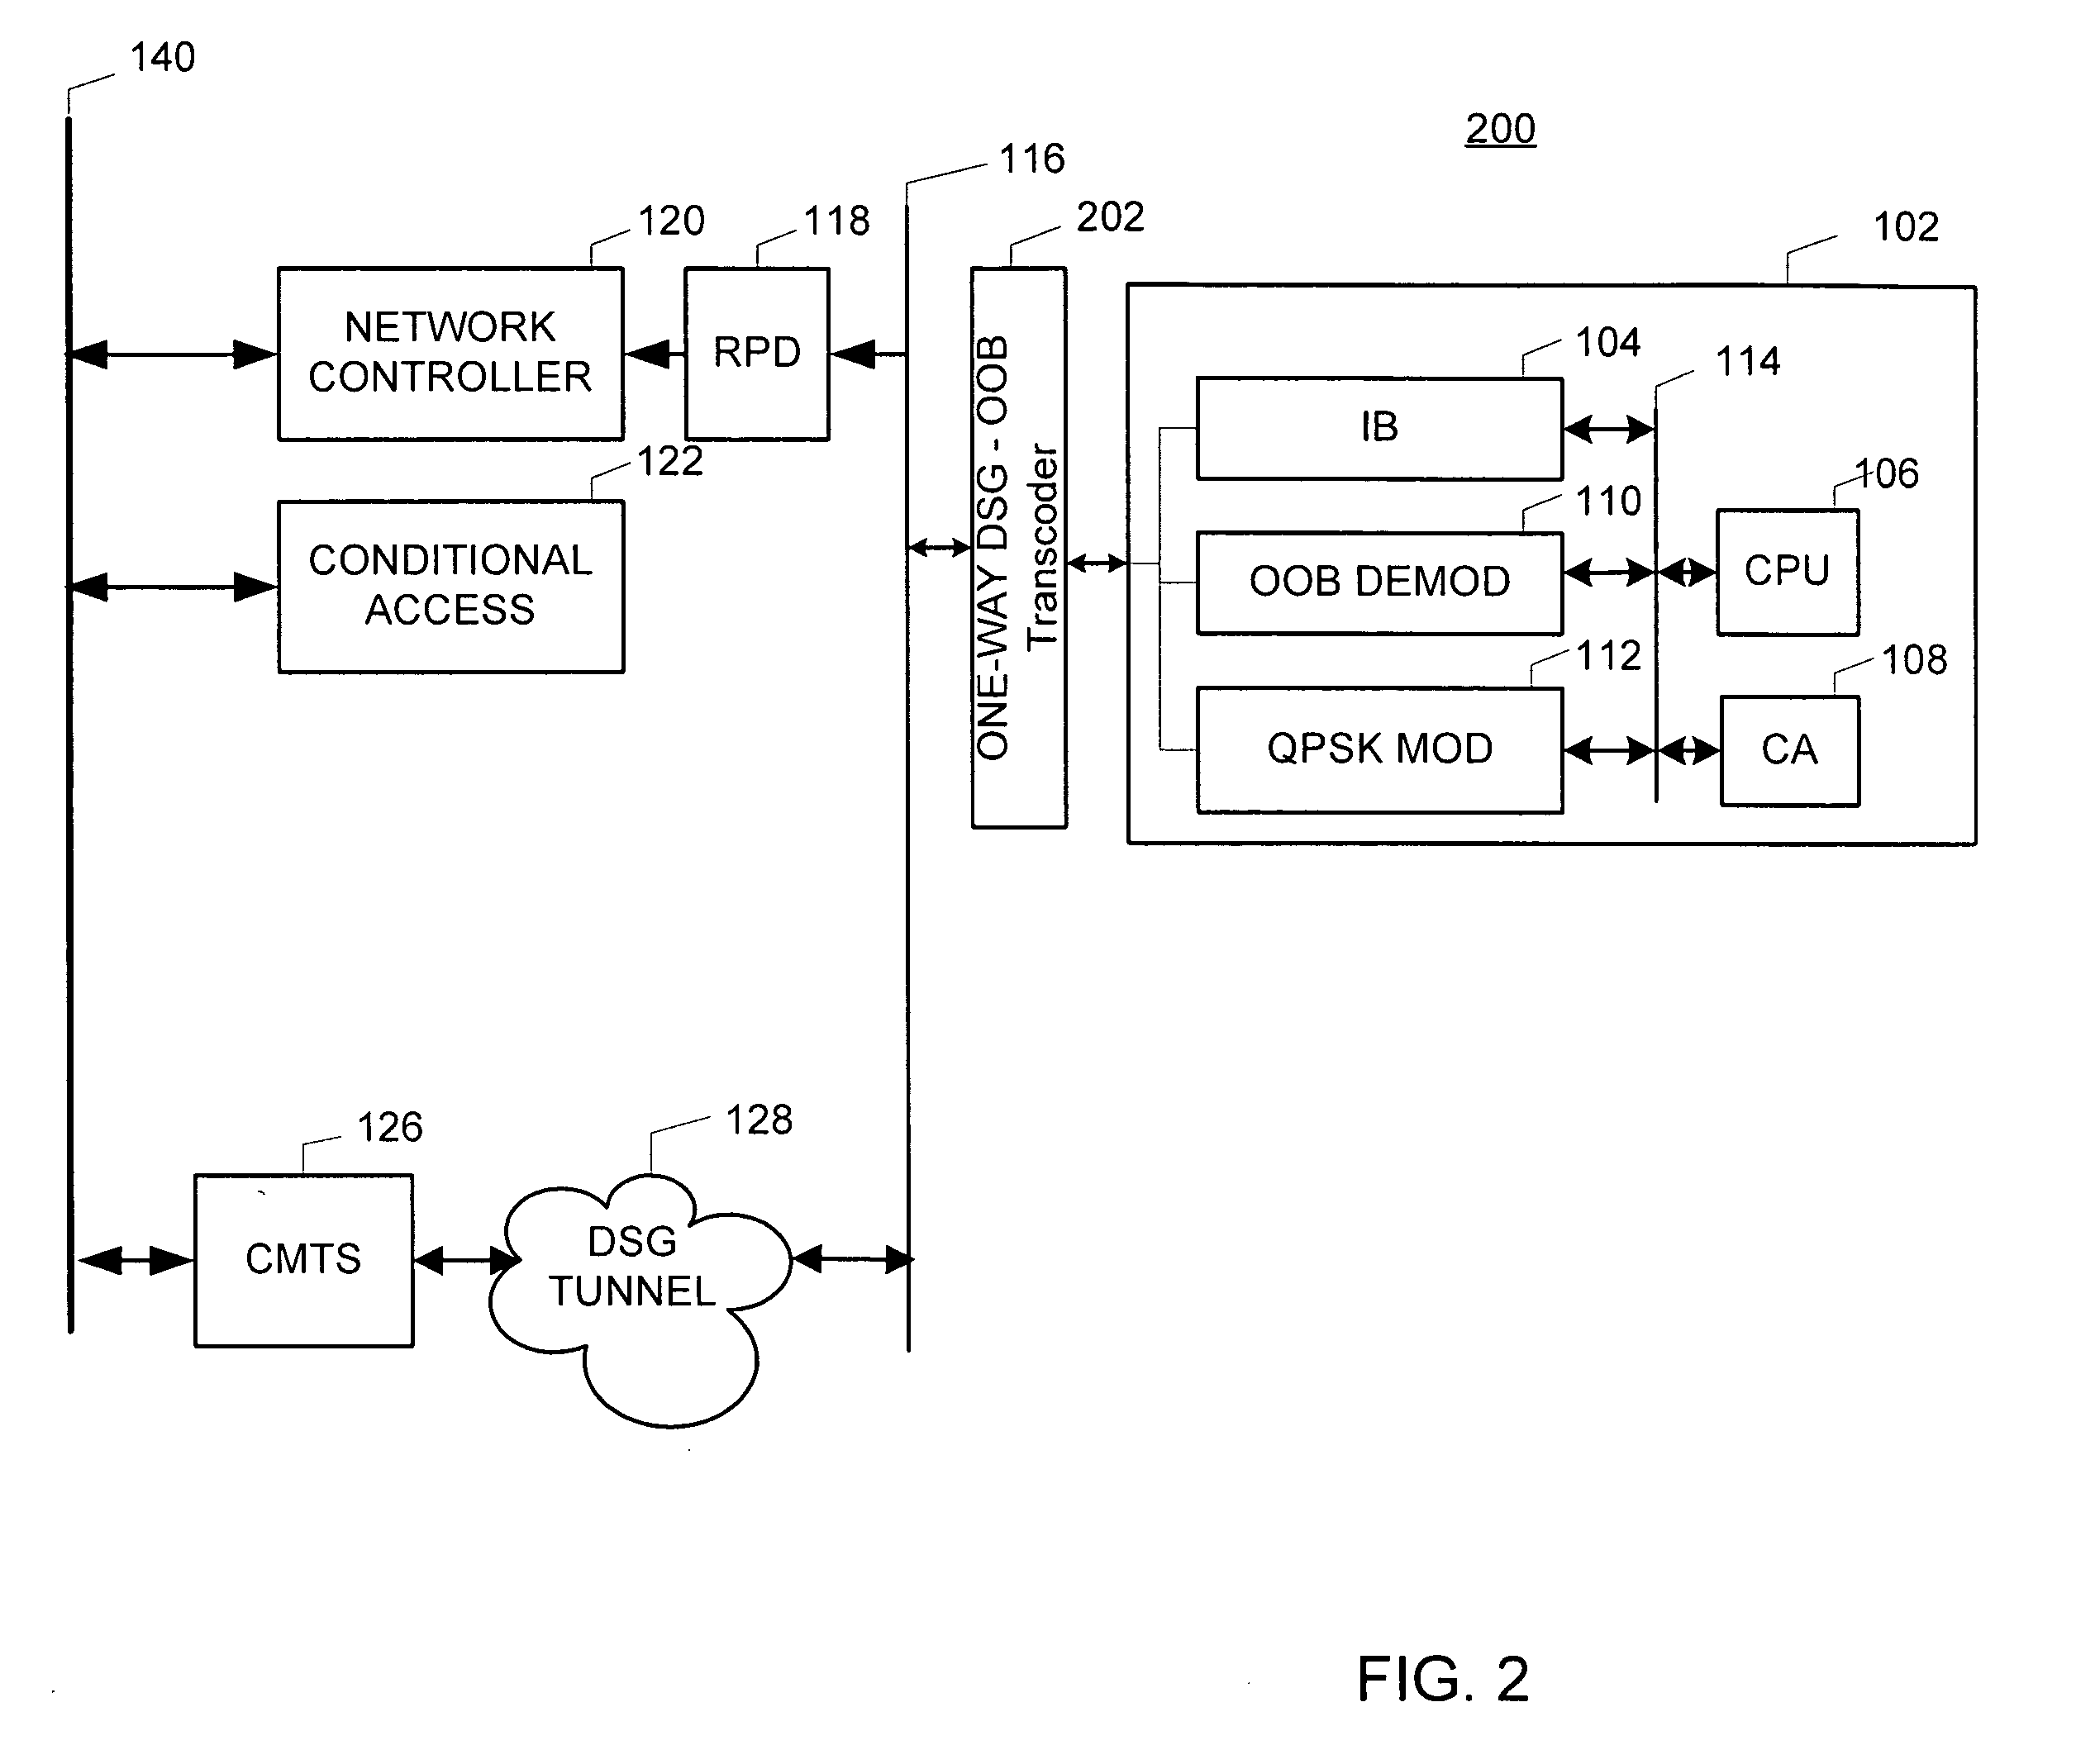 Method and apparatus for providing a DSG to an OOB transcoder